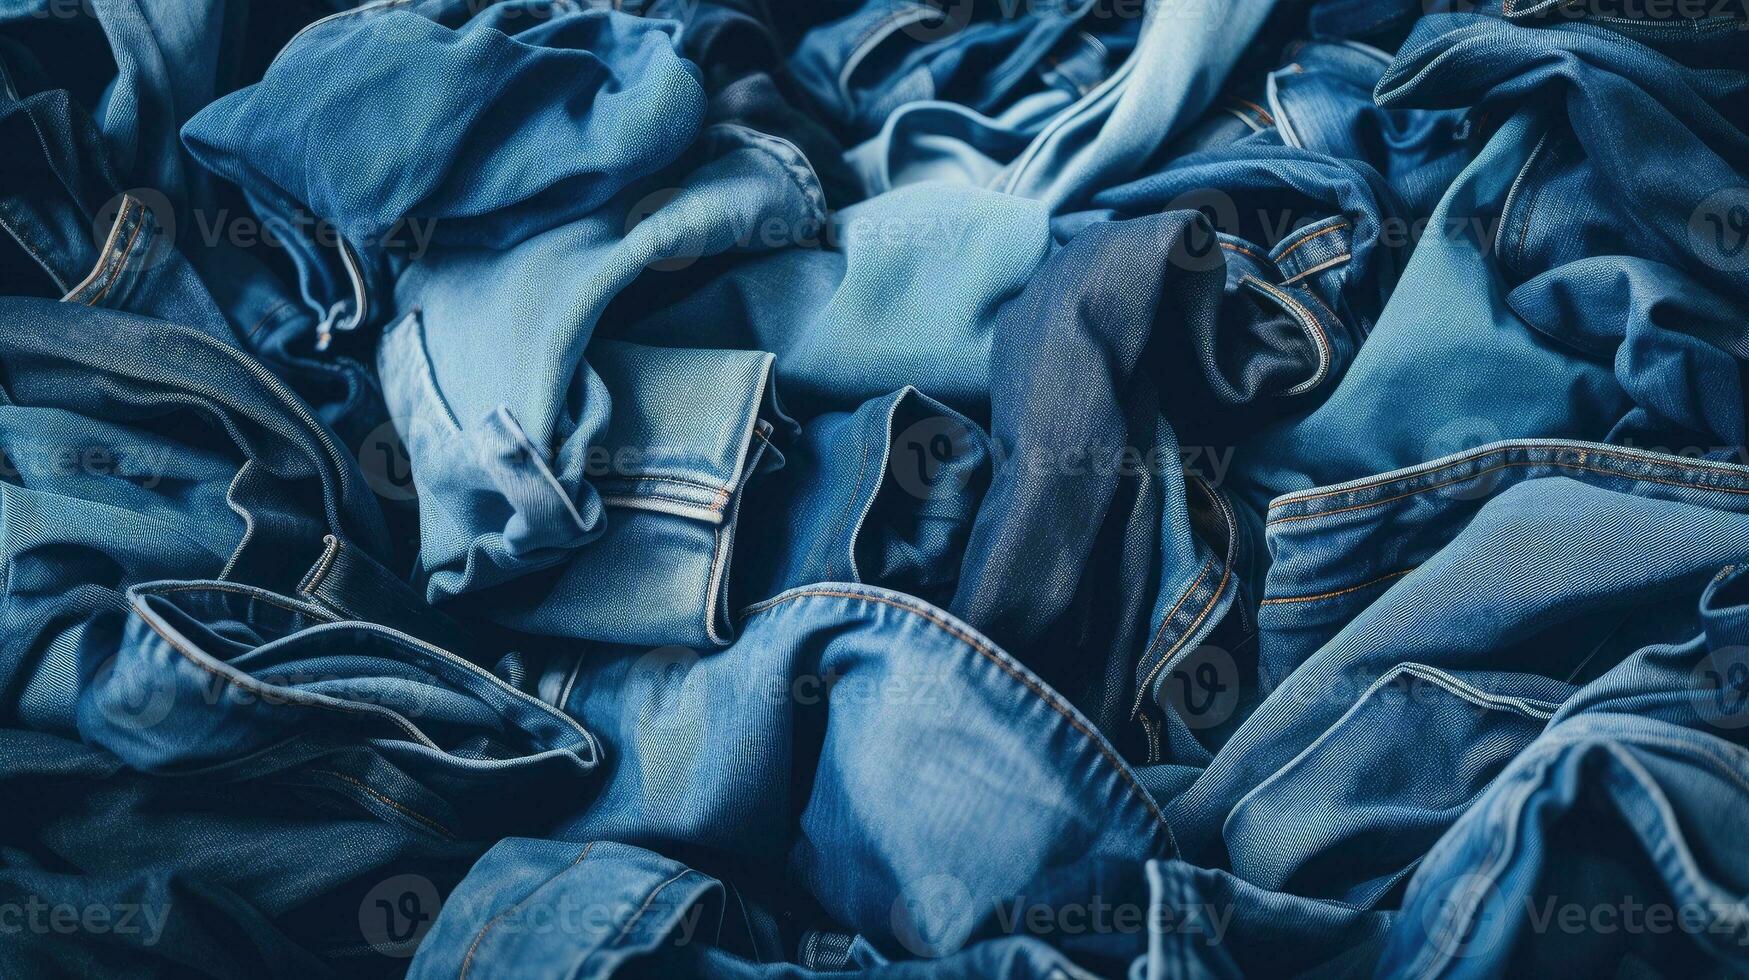 AI generated Assorted Crumpled Blue Jeans - Top View Denim Stack Background. Fashionable Variety of Textured Folded Denim. Stylish Clothing Display Ideal for Design Concepts, and Apparel Marketing photo